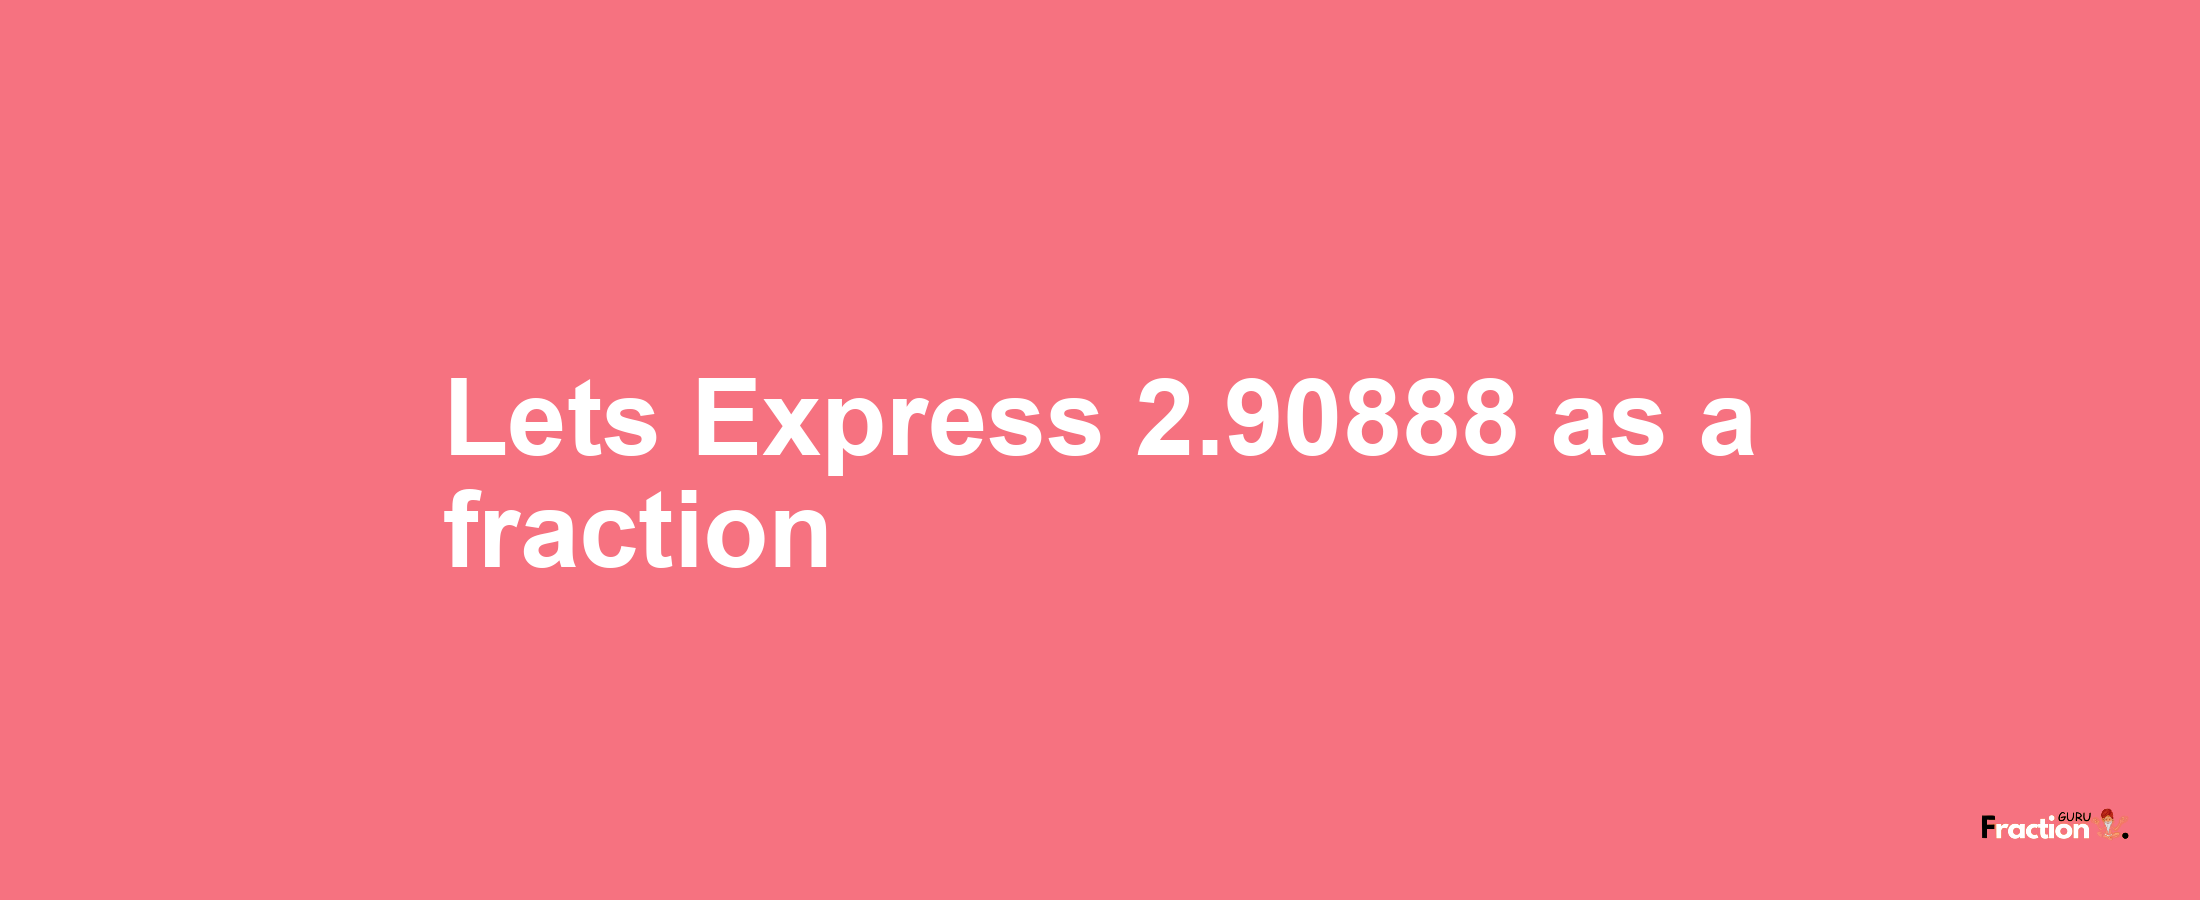 Lets Express 2.90888 as afraction